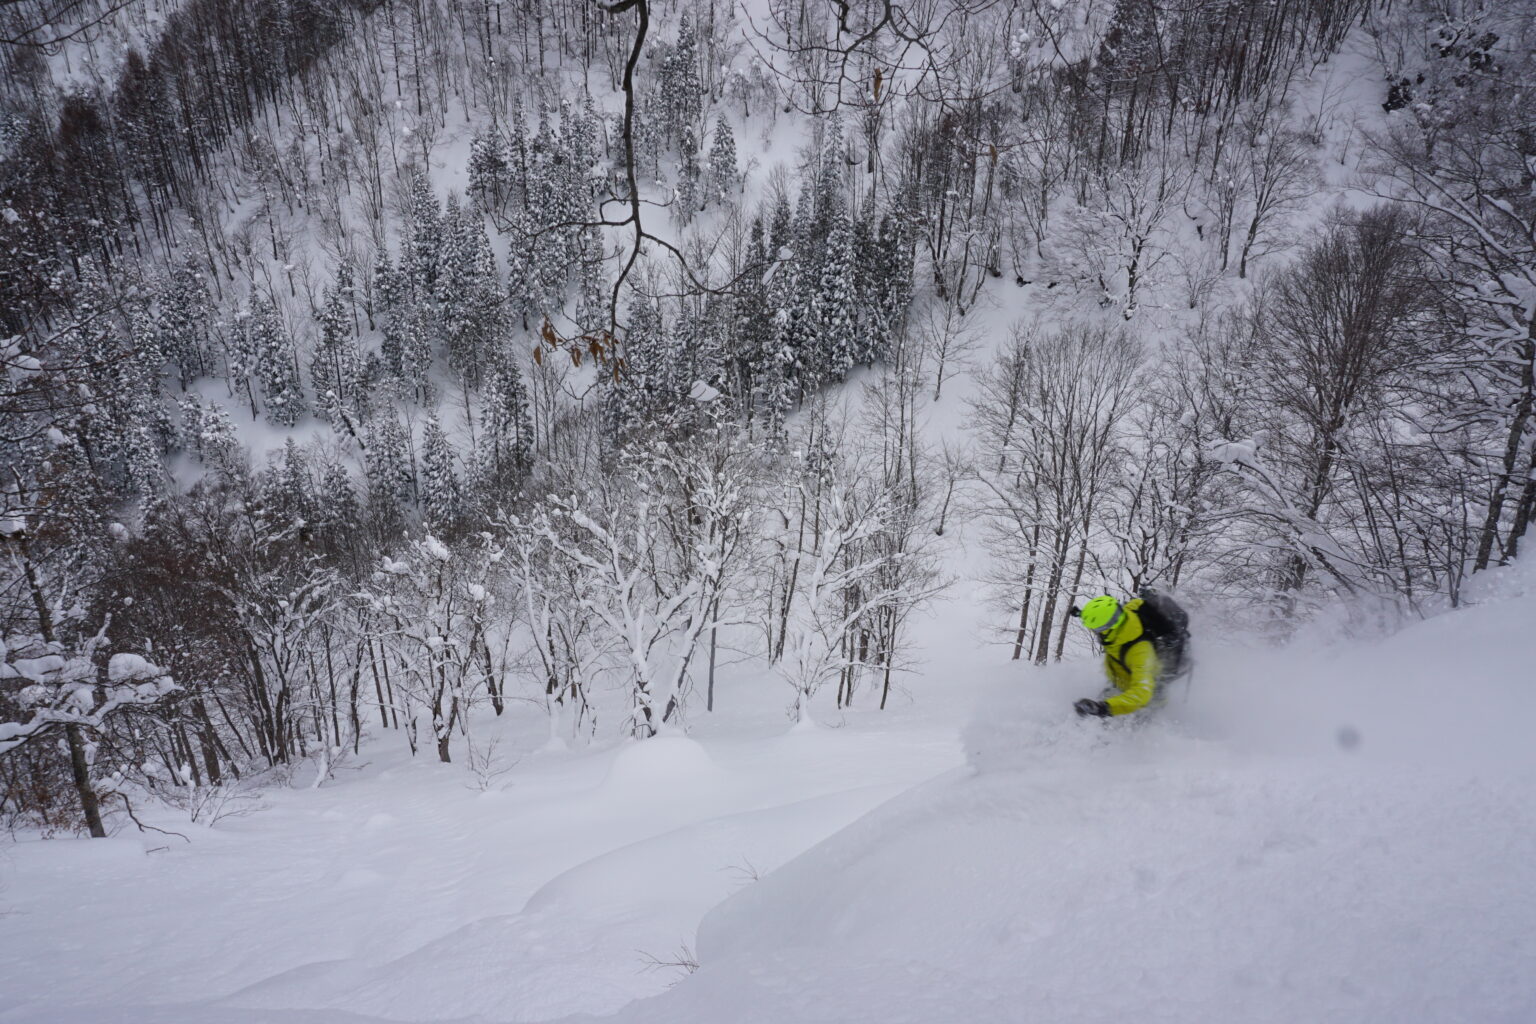 Powder day in the Japan Backcountry